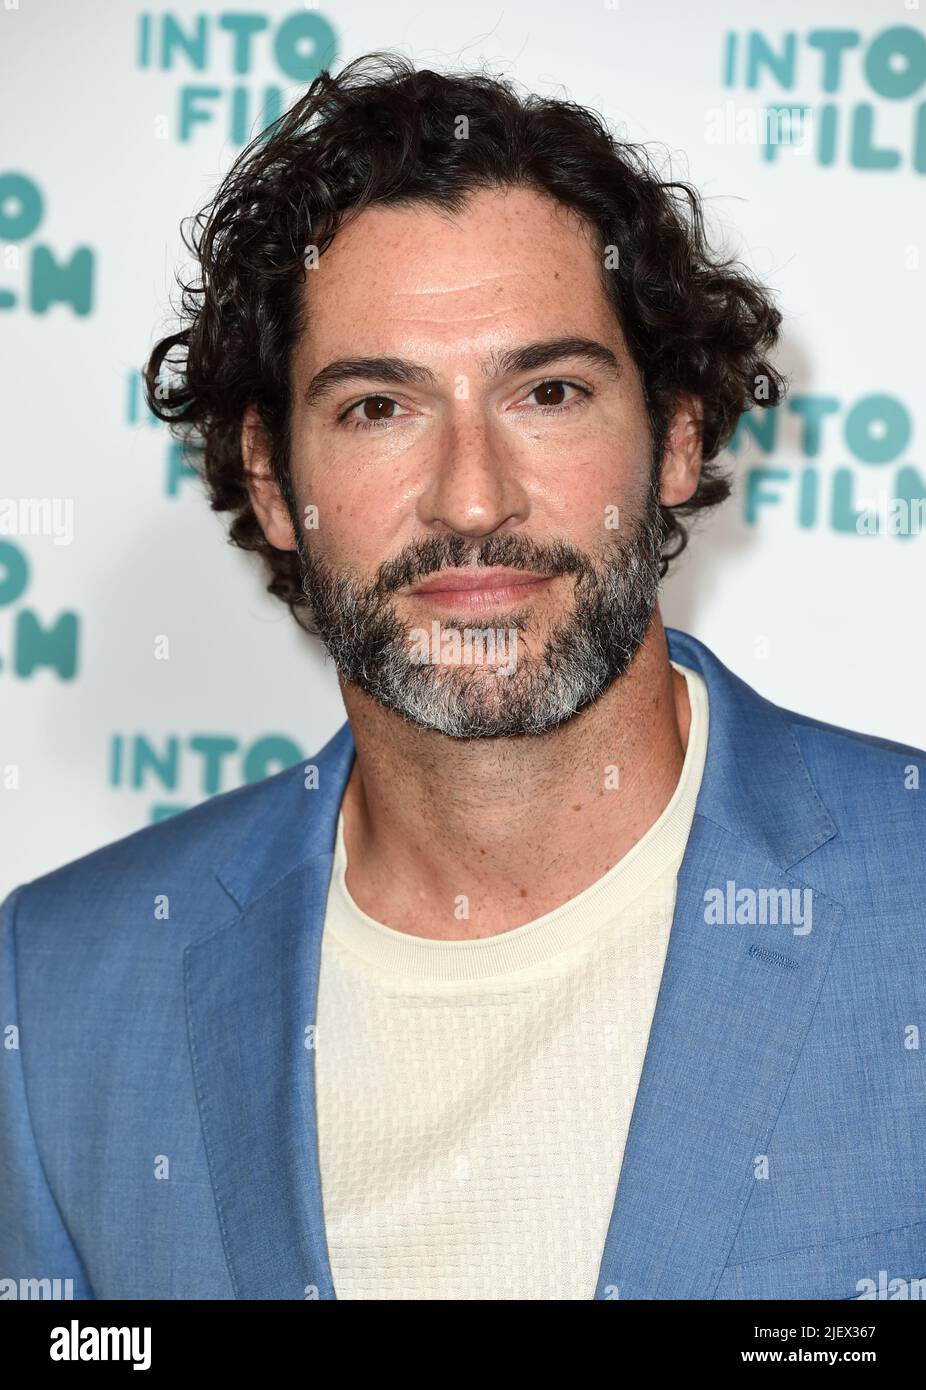 June 28th, 2022. London, UK. Tom Ellis arriving at the Into Film Awards 2022, the Odeon Luxe, Leicester Square, London. Credit: Doug Peters/EMPICS/Alamy Live News Stock Photo